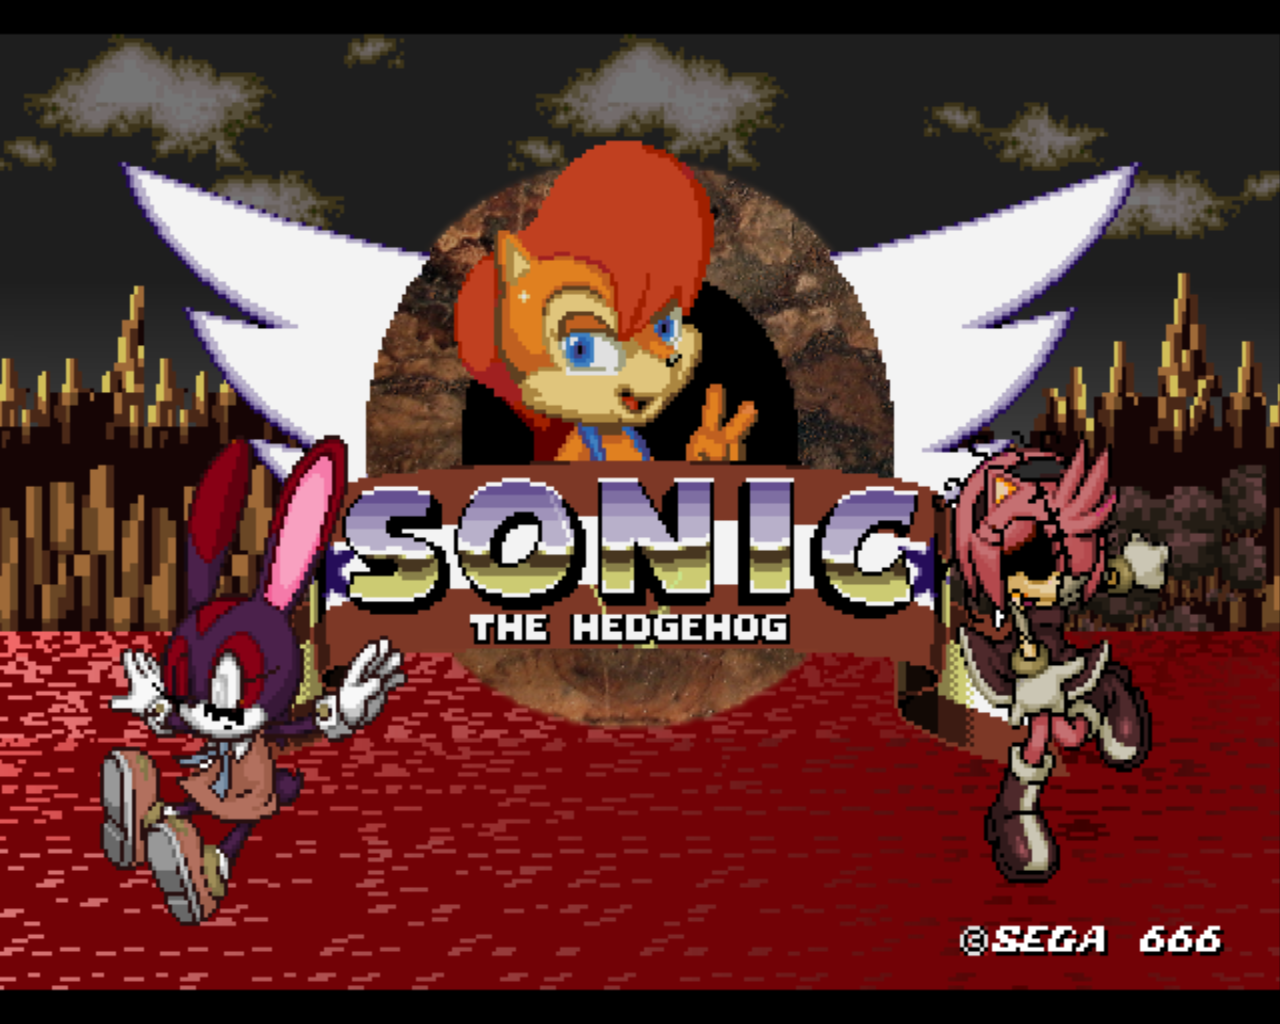 Sonic.EXE - The Game, Game Jolt Games Database Wiki